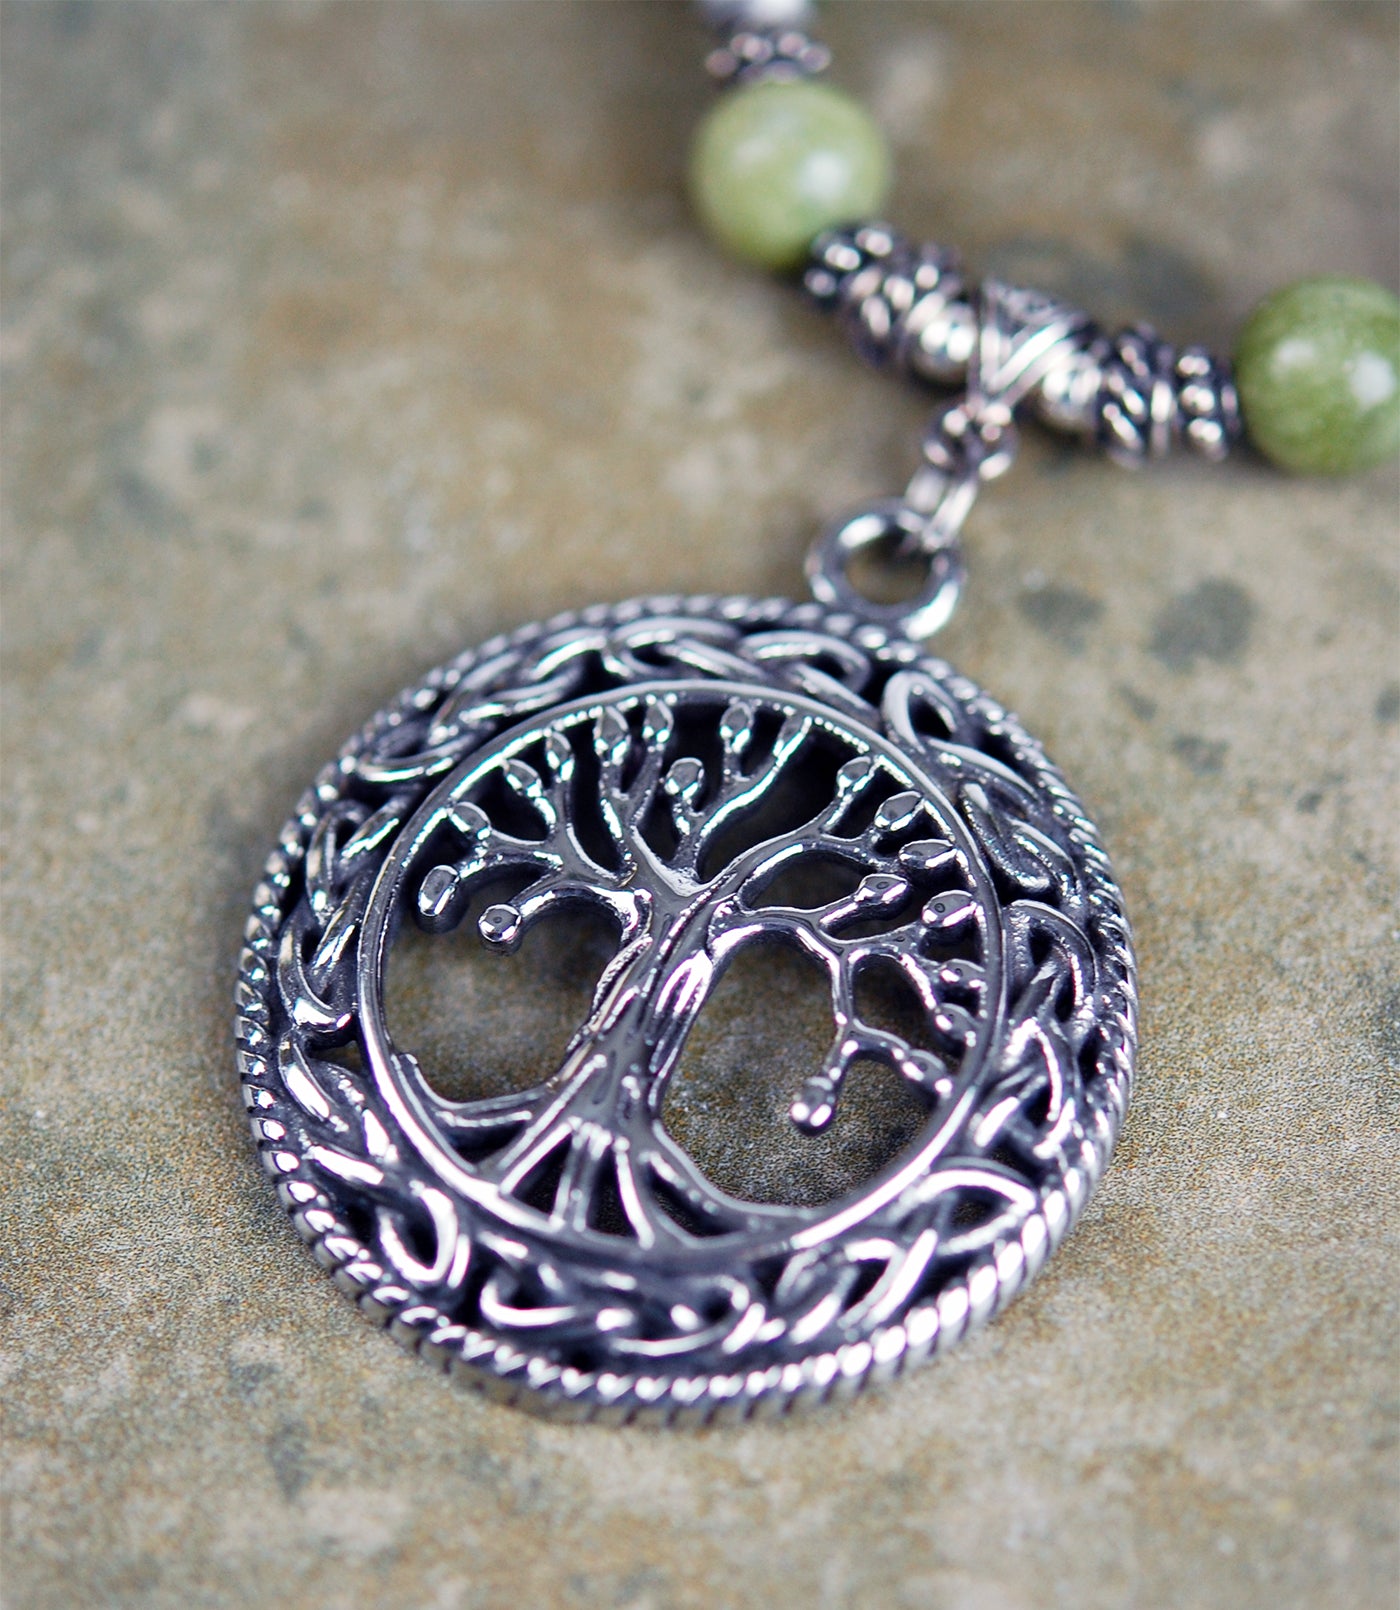 Connemara Marble with Tree of Life Focal